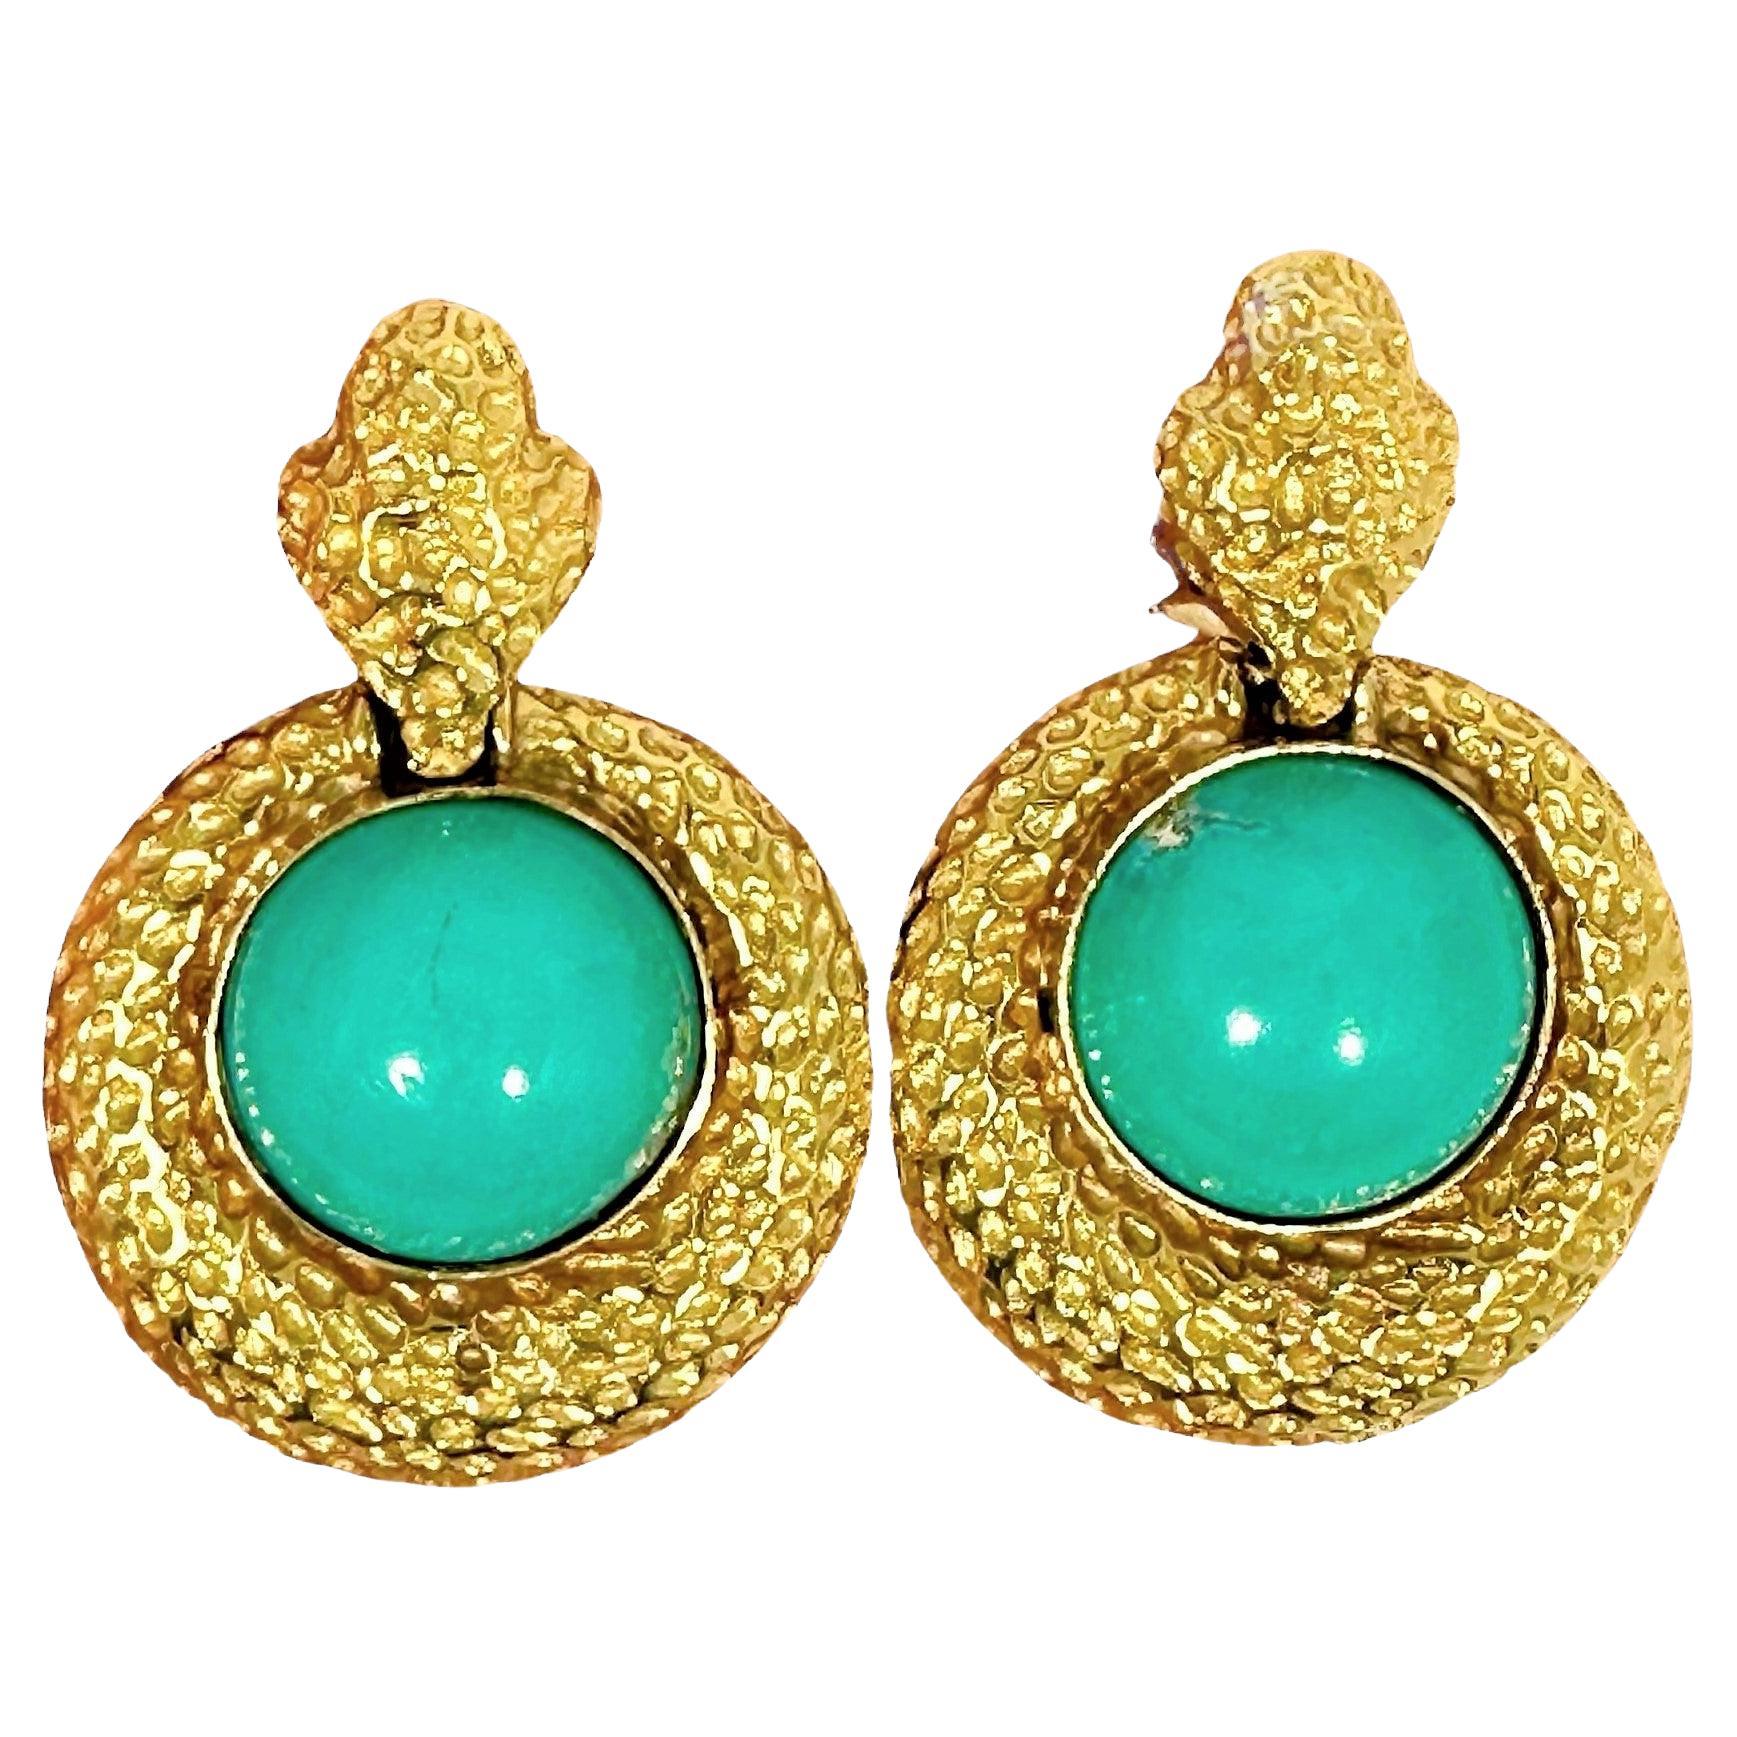 A pair of 1960’s Spritzer & Furhmann 18K yellow gold earrings, with a door knocker design. Each earring is set with one 18mm Persian turquoise cabochon. The contrasting rich gold and turquoise colors are brought together by a framework which is